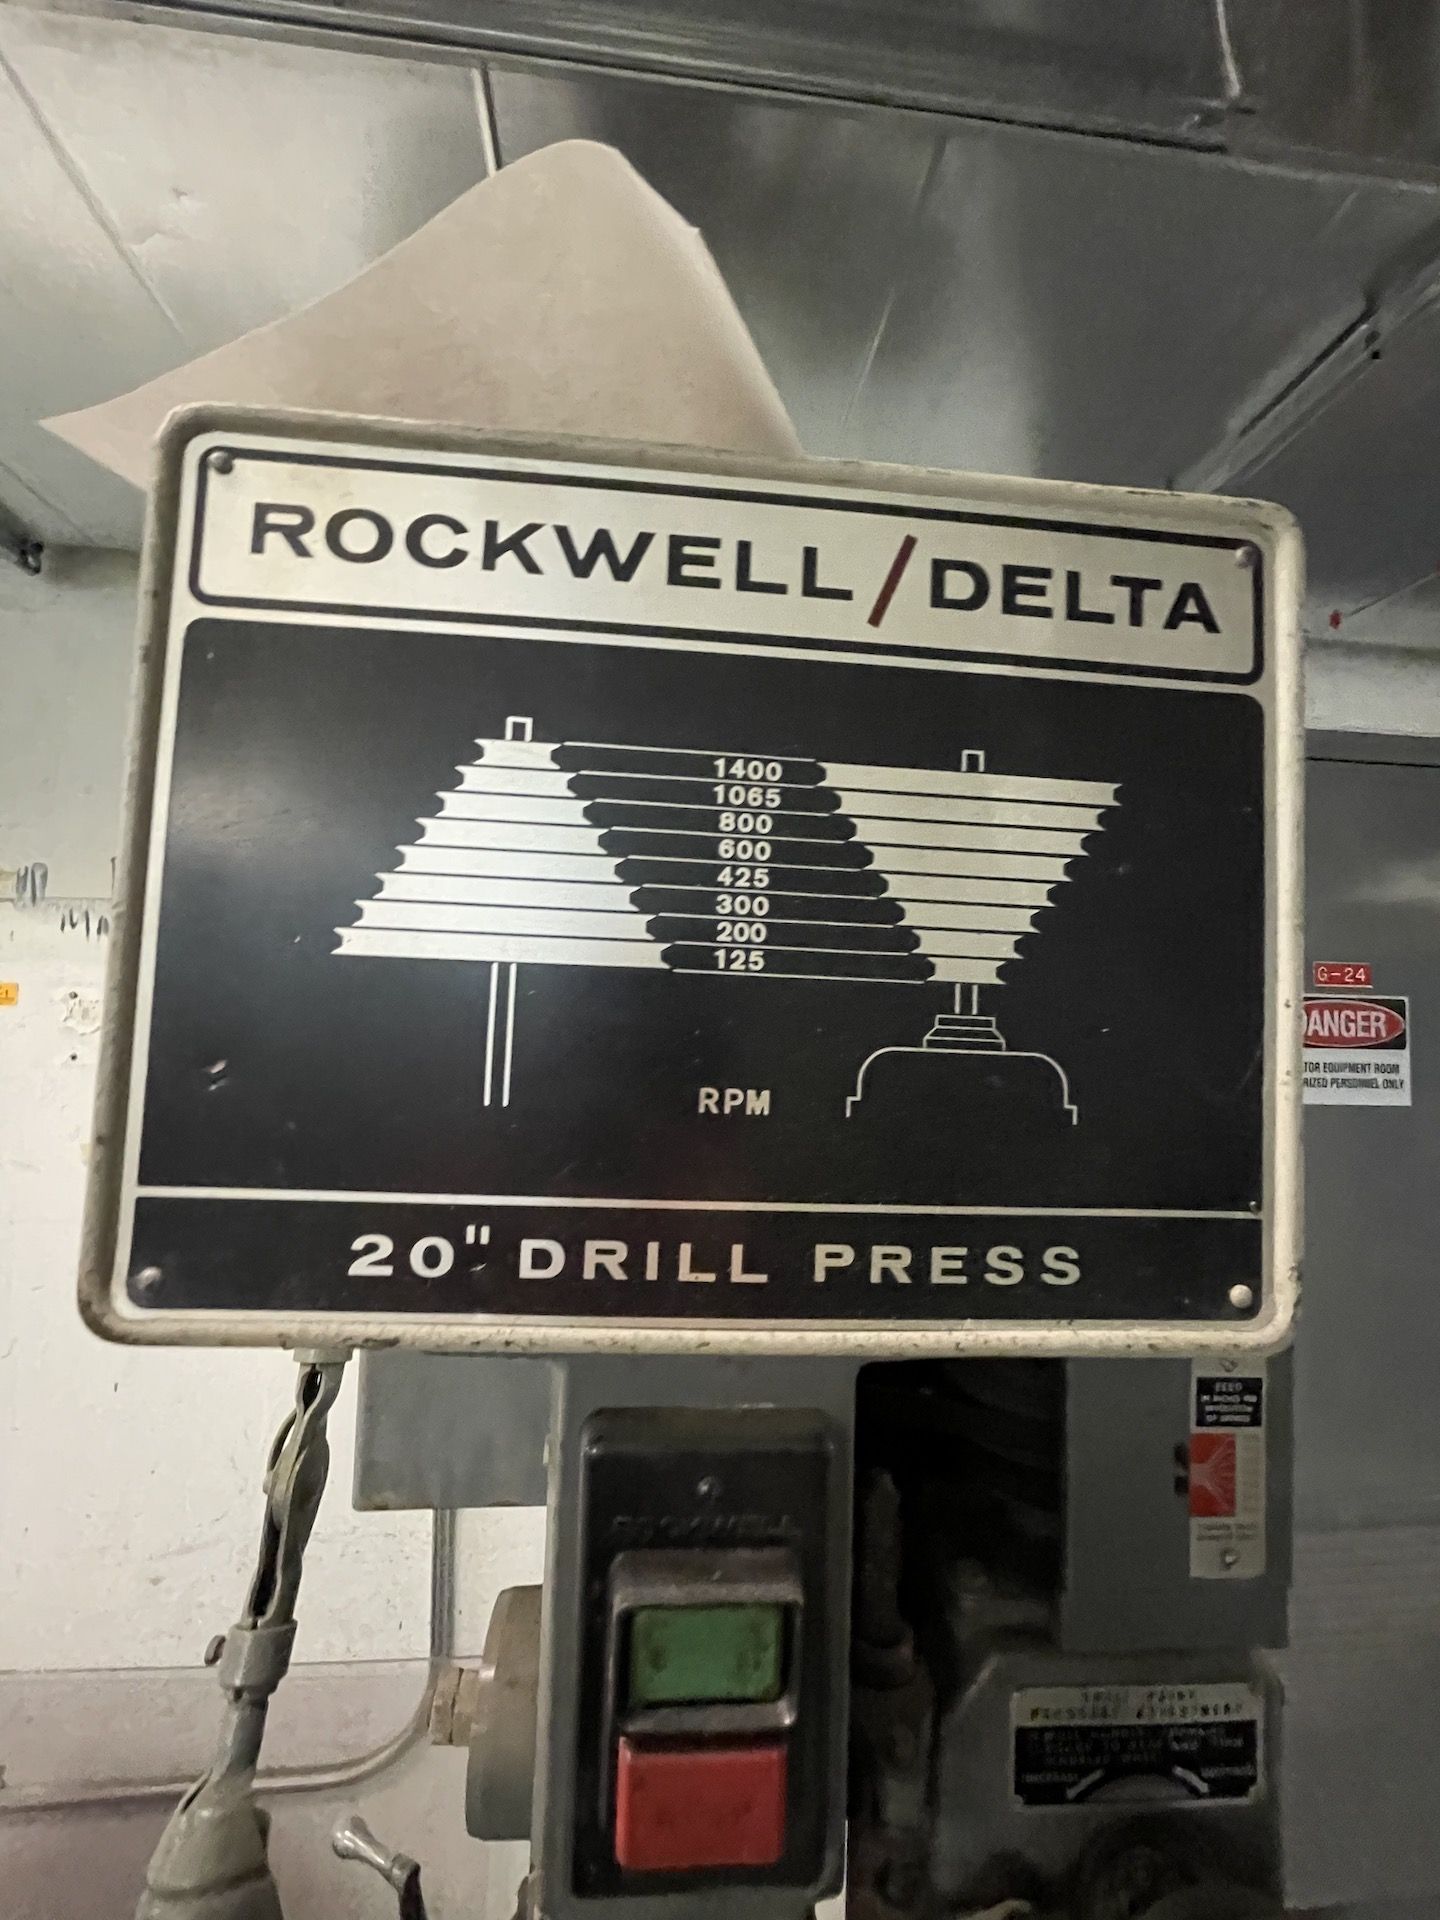 ROCKWELL 20'' DRILL PRESS, 125-1400 RPM, MODEL 70-6X0, S/N 1539427 (Non-Negotiable Rigging, - Image 3 of 11